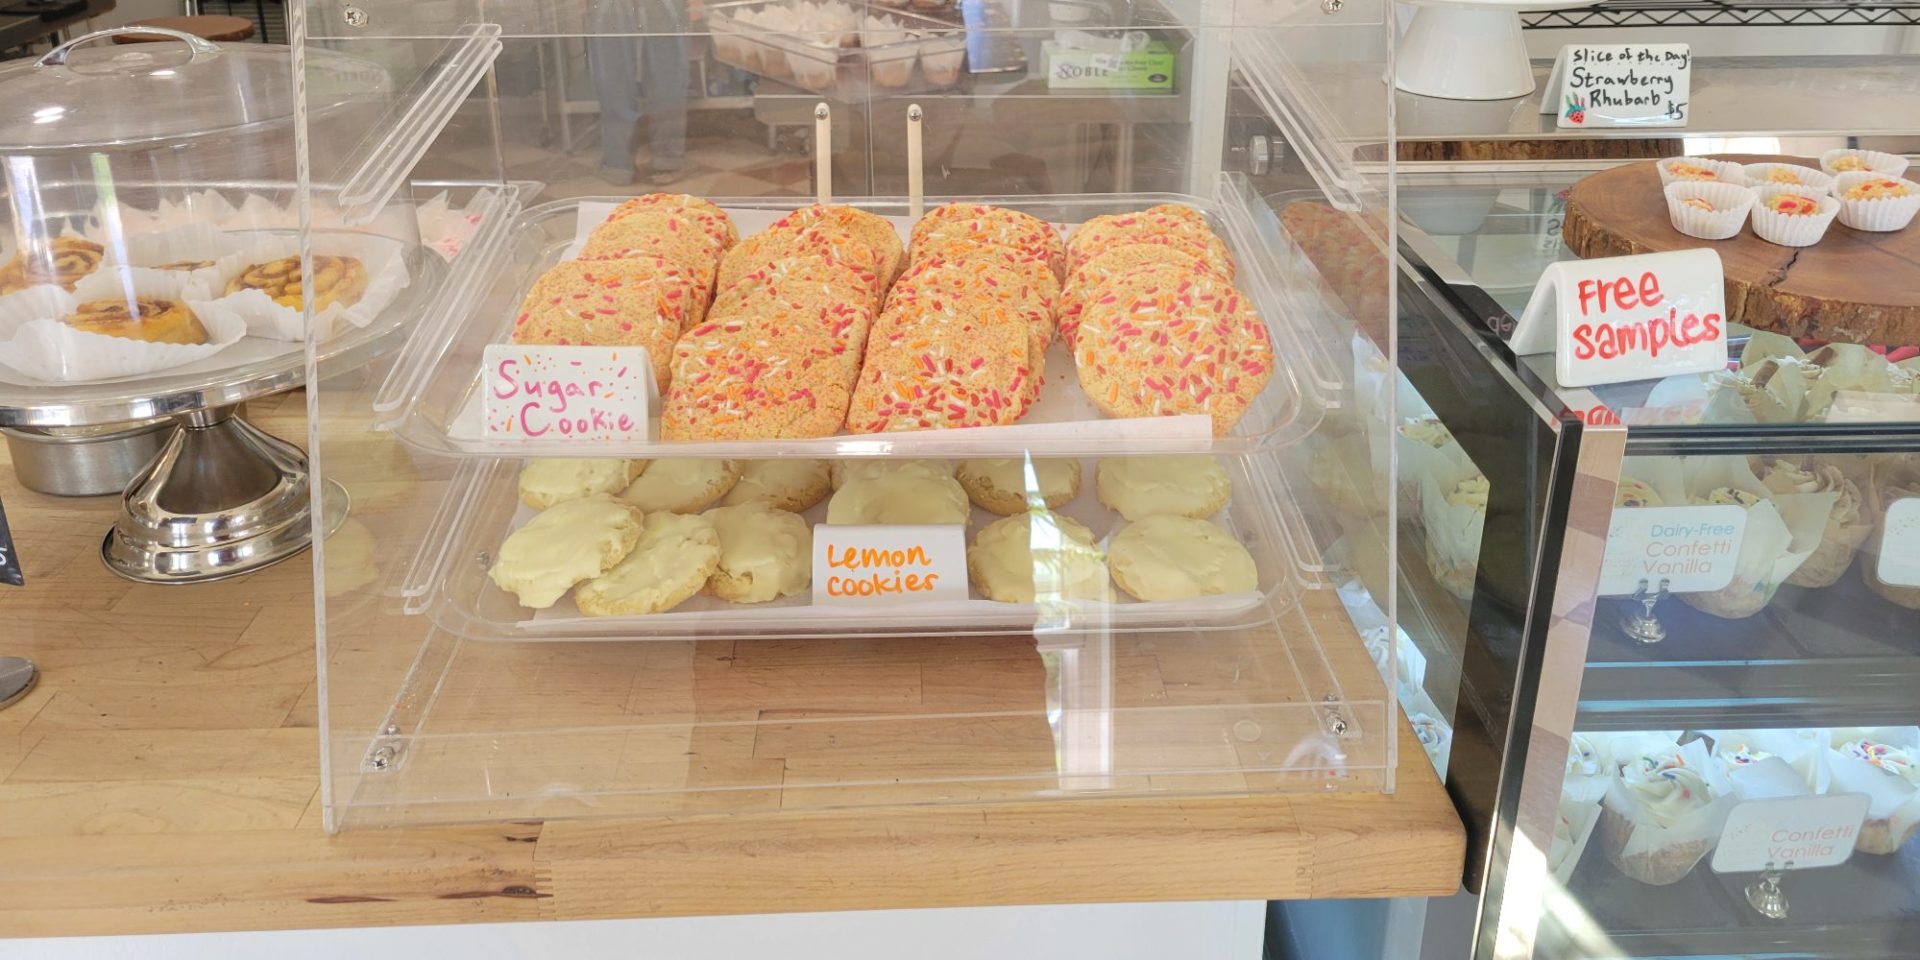 A display of dairy free and gluten free cookies with free samples nearby.